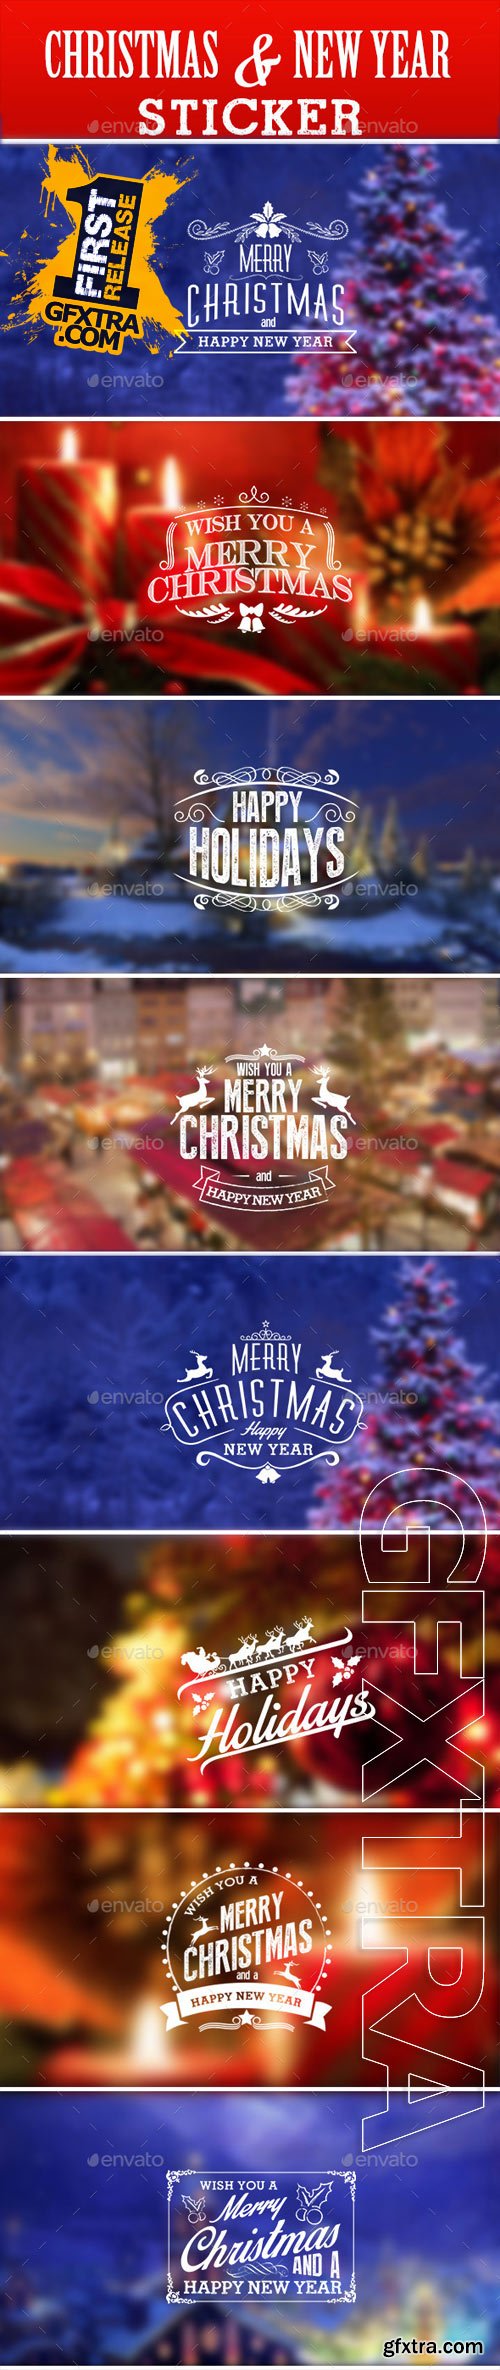 GraphicRiver - Christmas & New Year Sticker 9457587